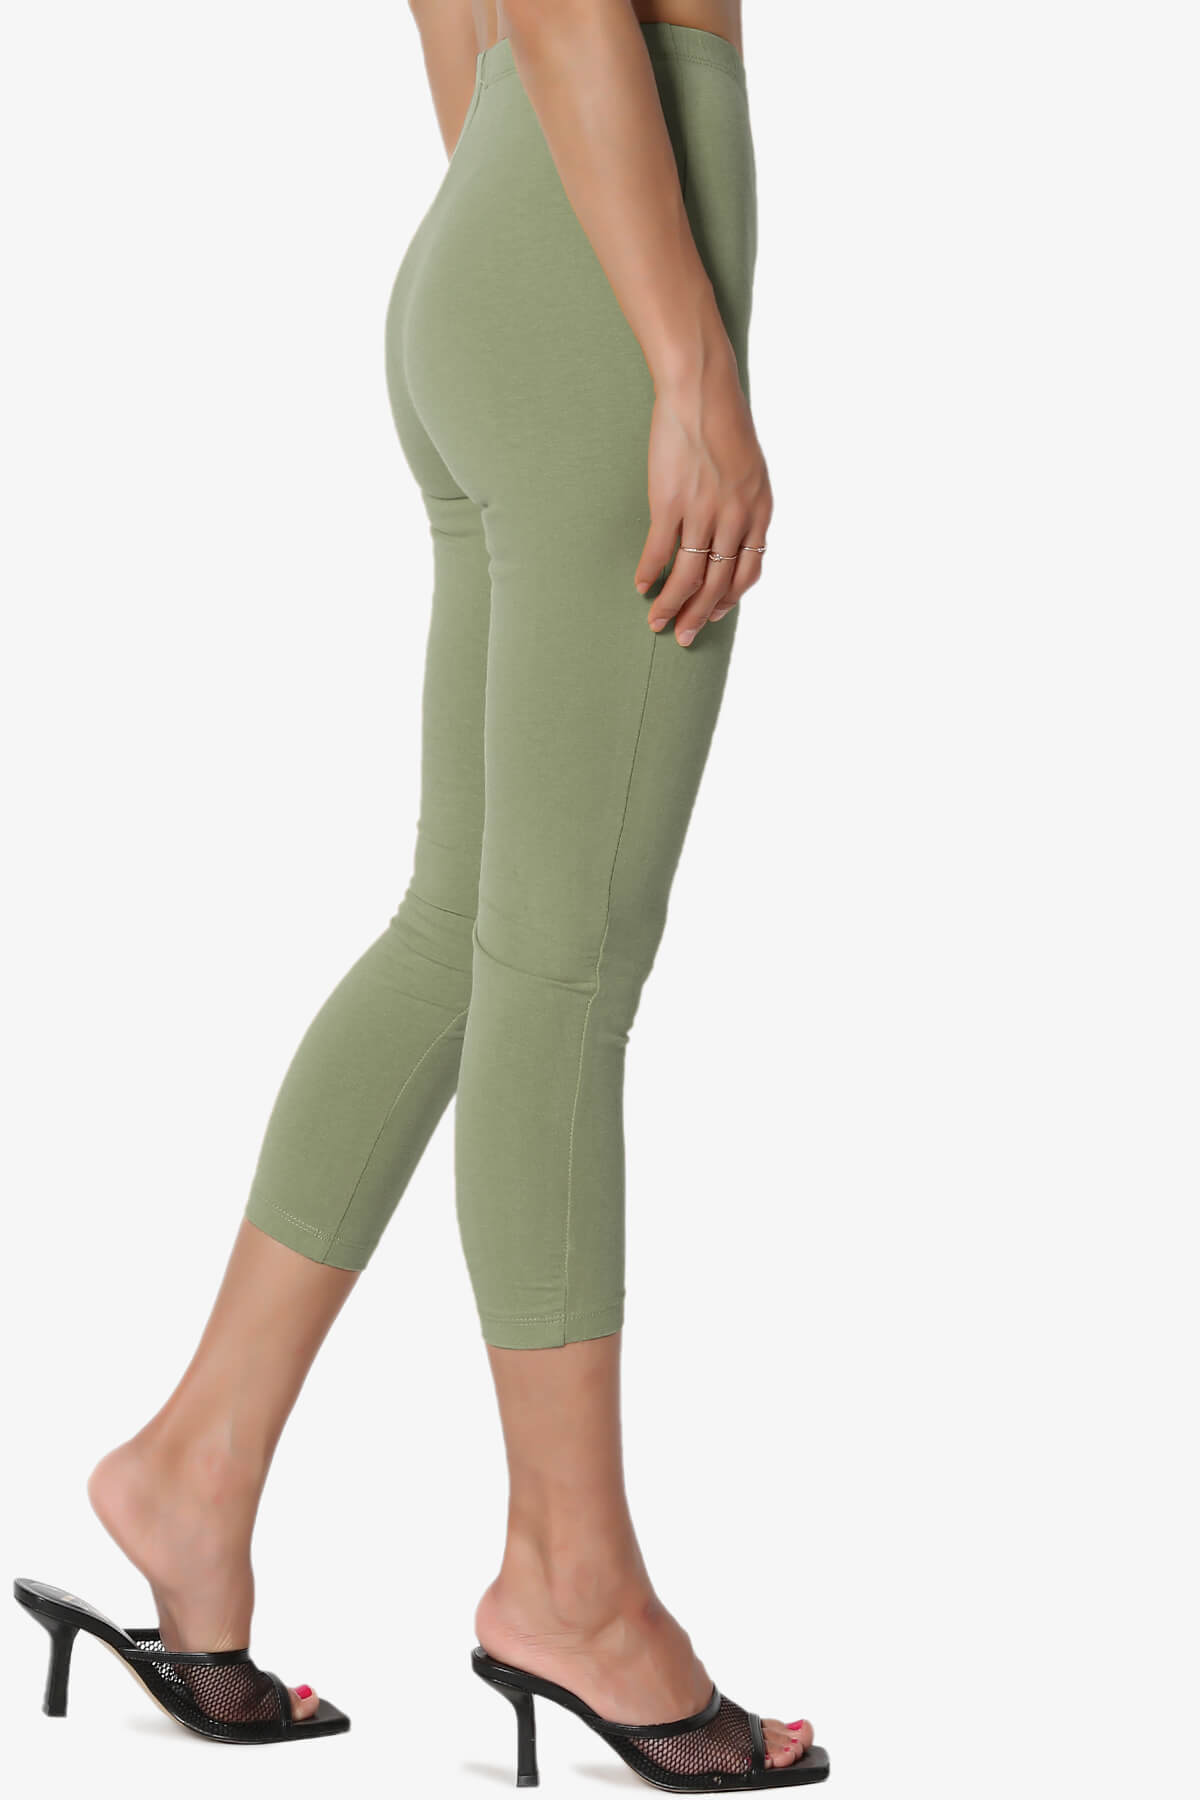 Load image into Gallery viewer, Ansley Luxe Cotton Capri Leggings DUSTY OLIVE_4
